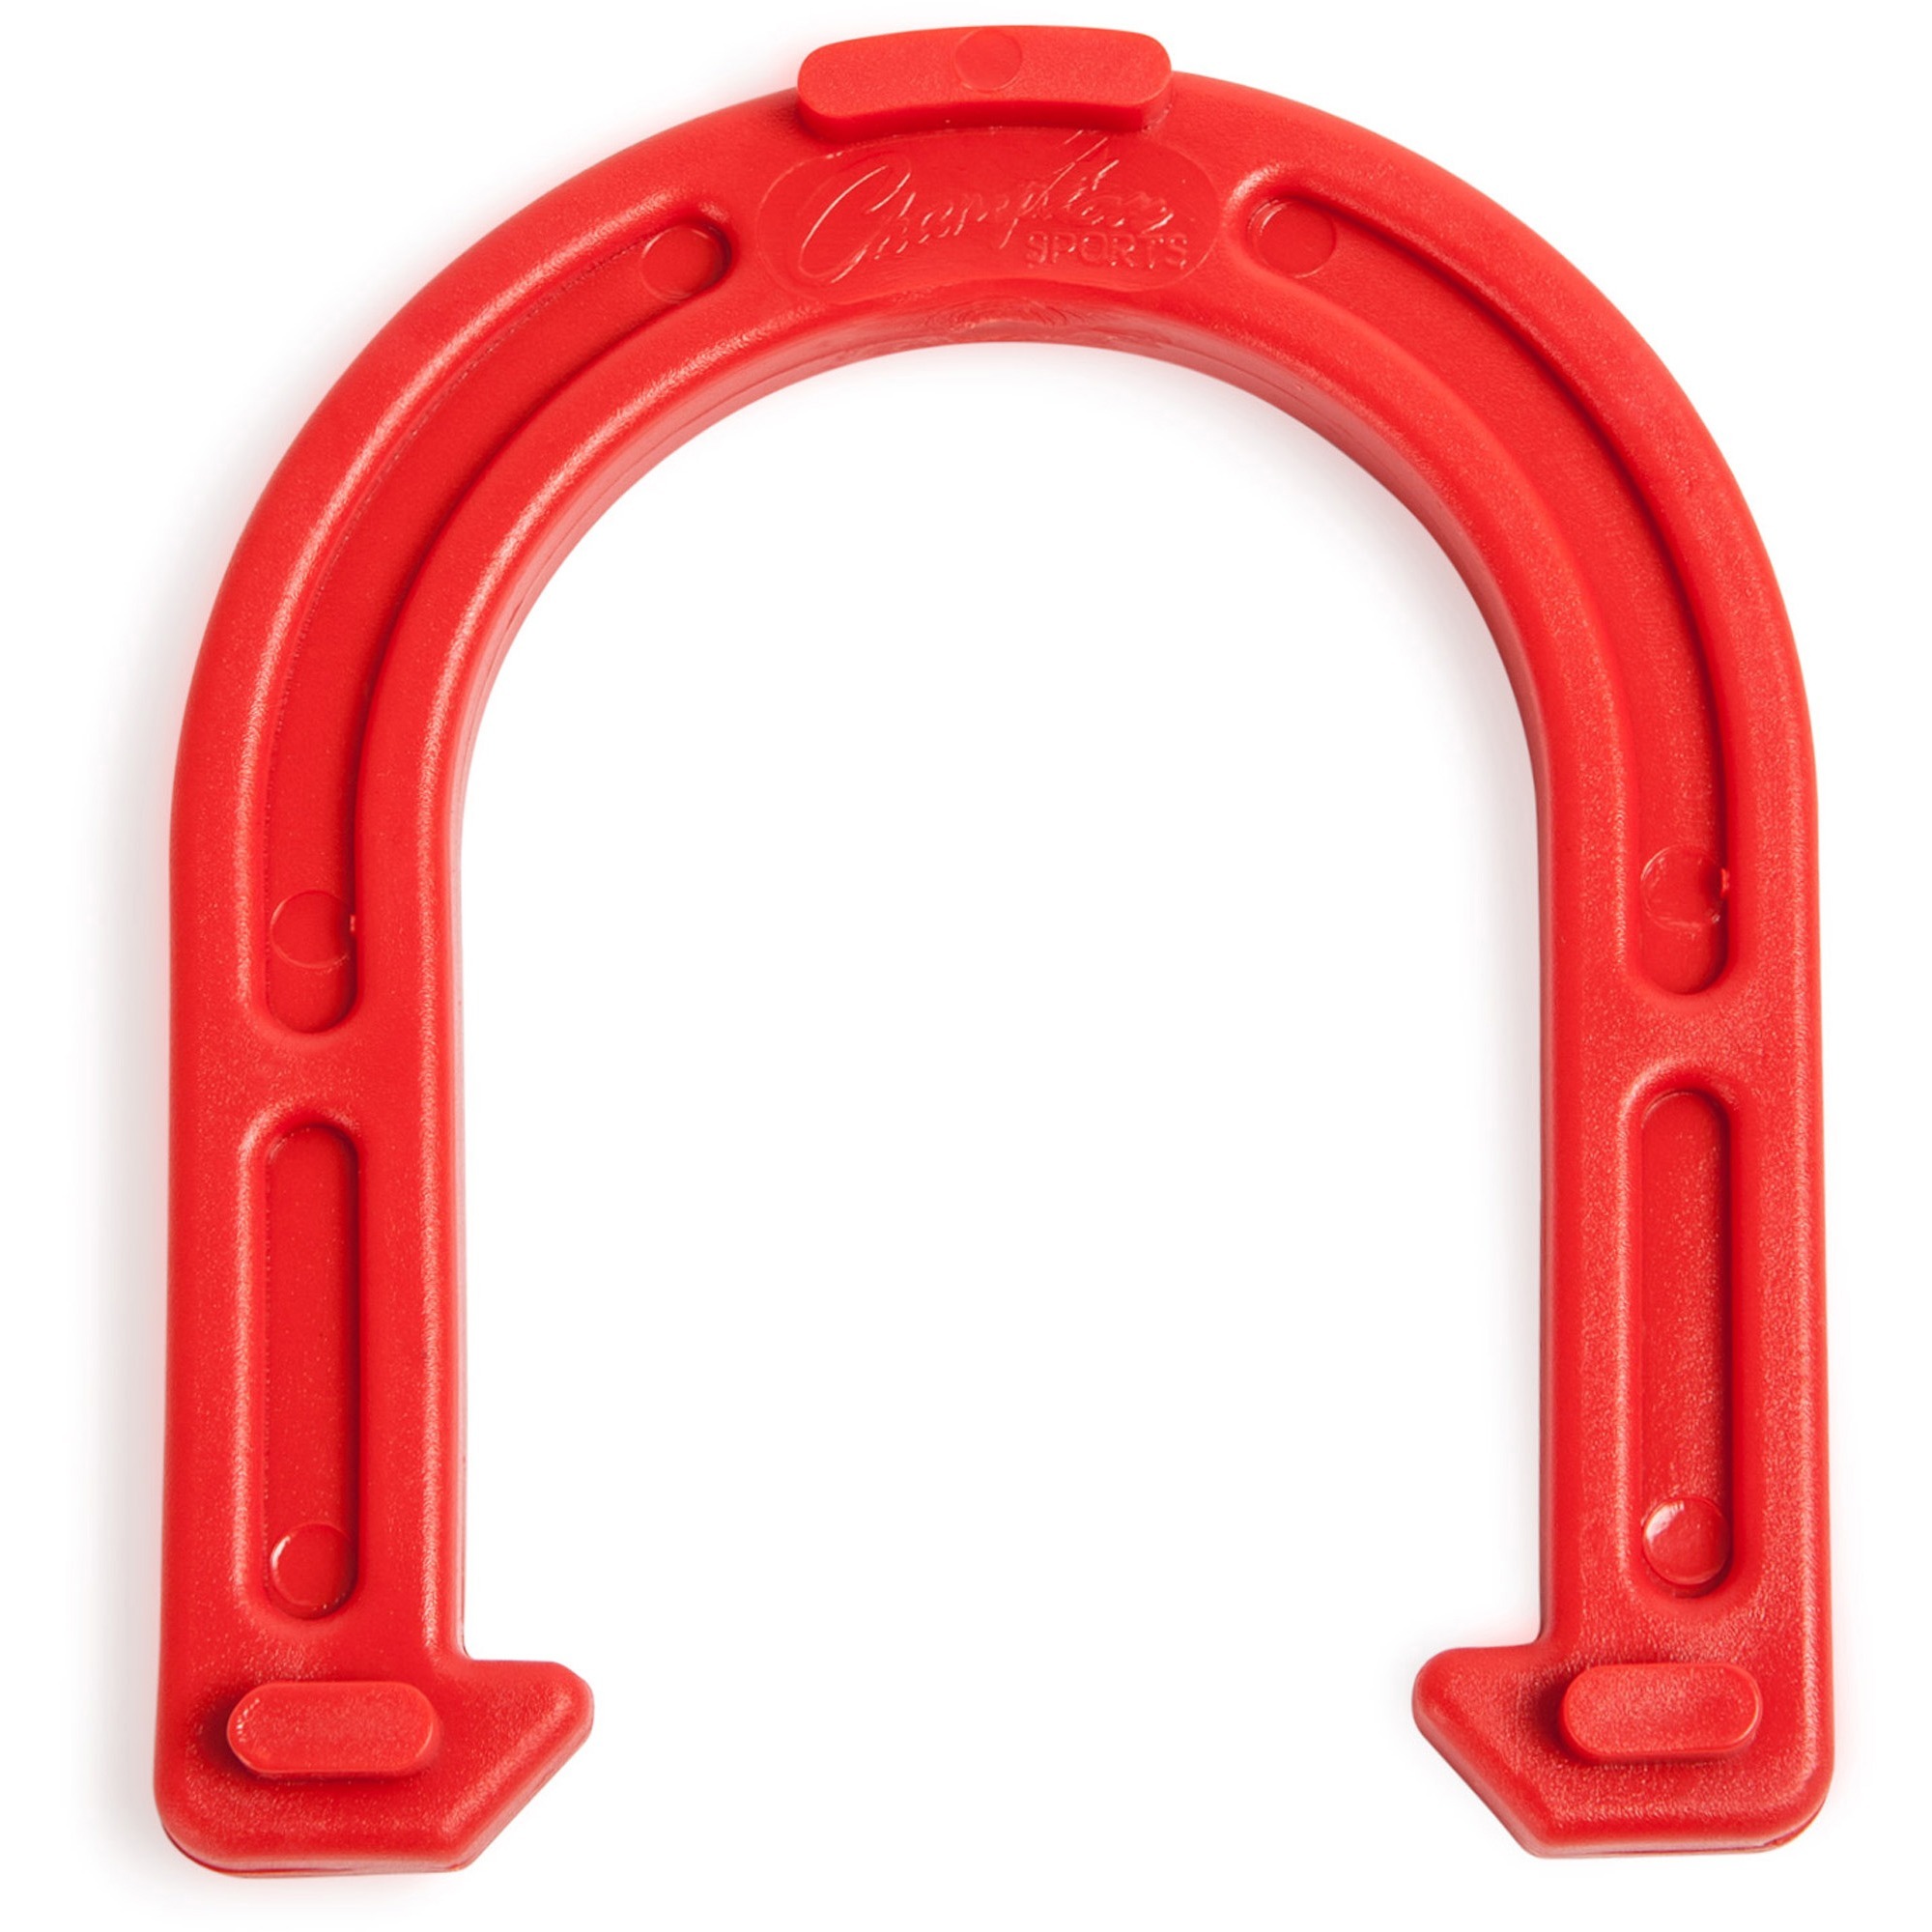 Champion Sports IHS1 Rubber Horseshoe Set for sale online 